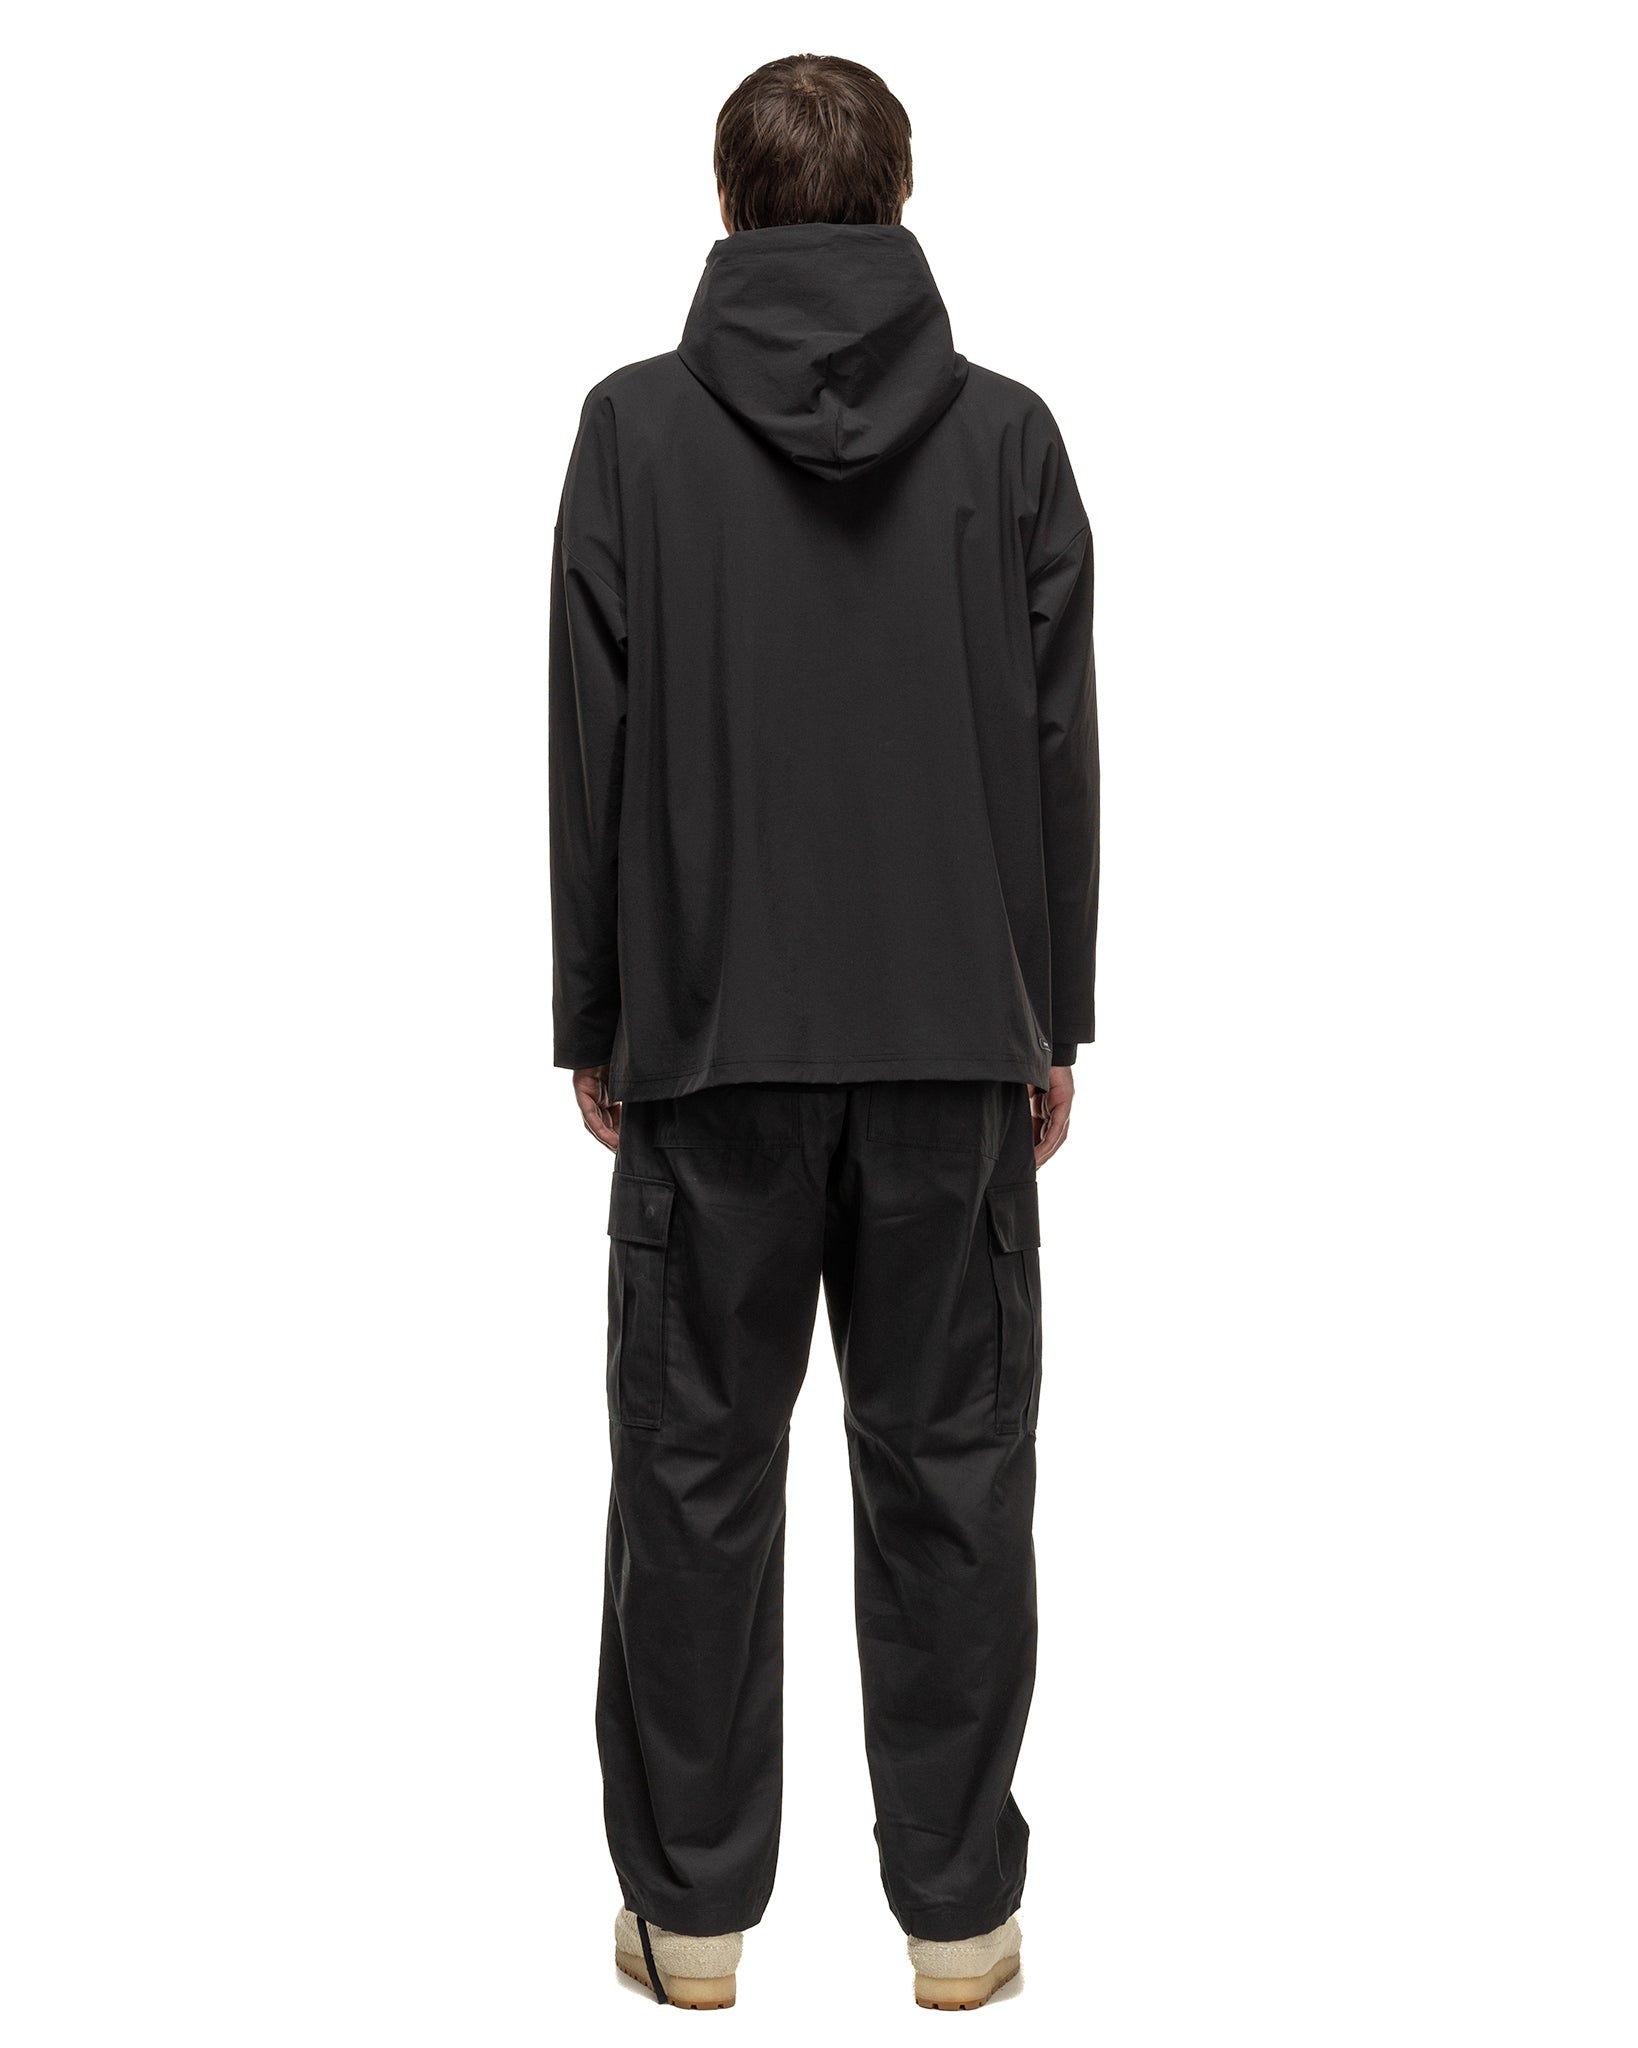 4Way Stretch Oversized Pullover Hoodie Black - 4